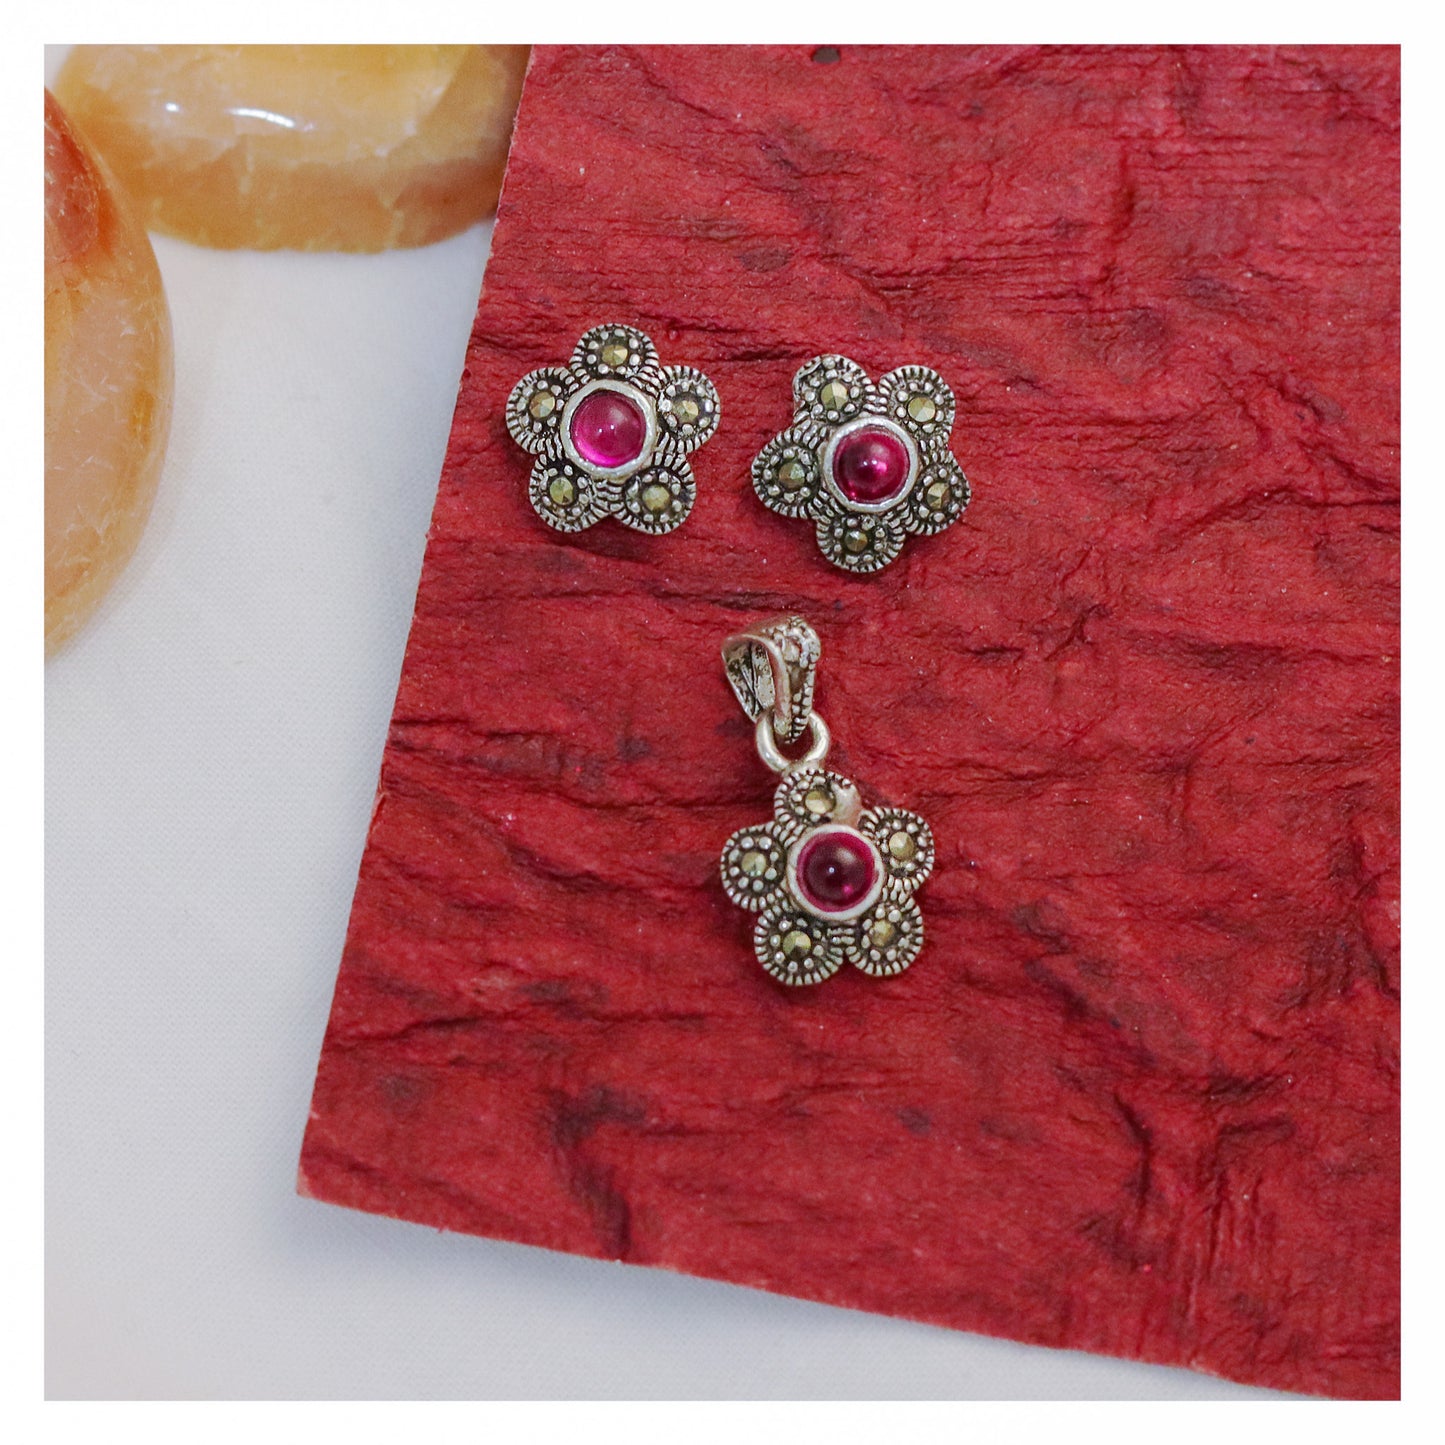 pendant and earrings set         birthday gift for wife           buy jewelry online